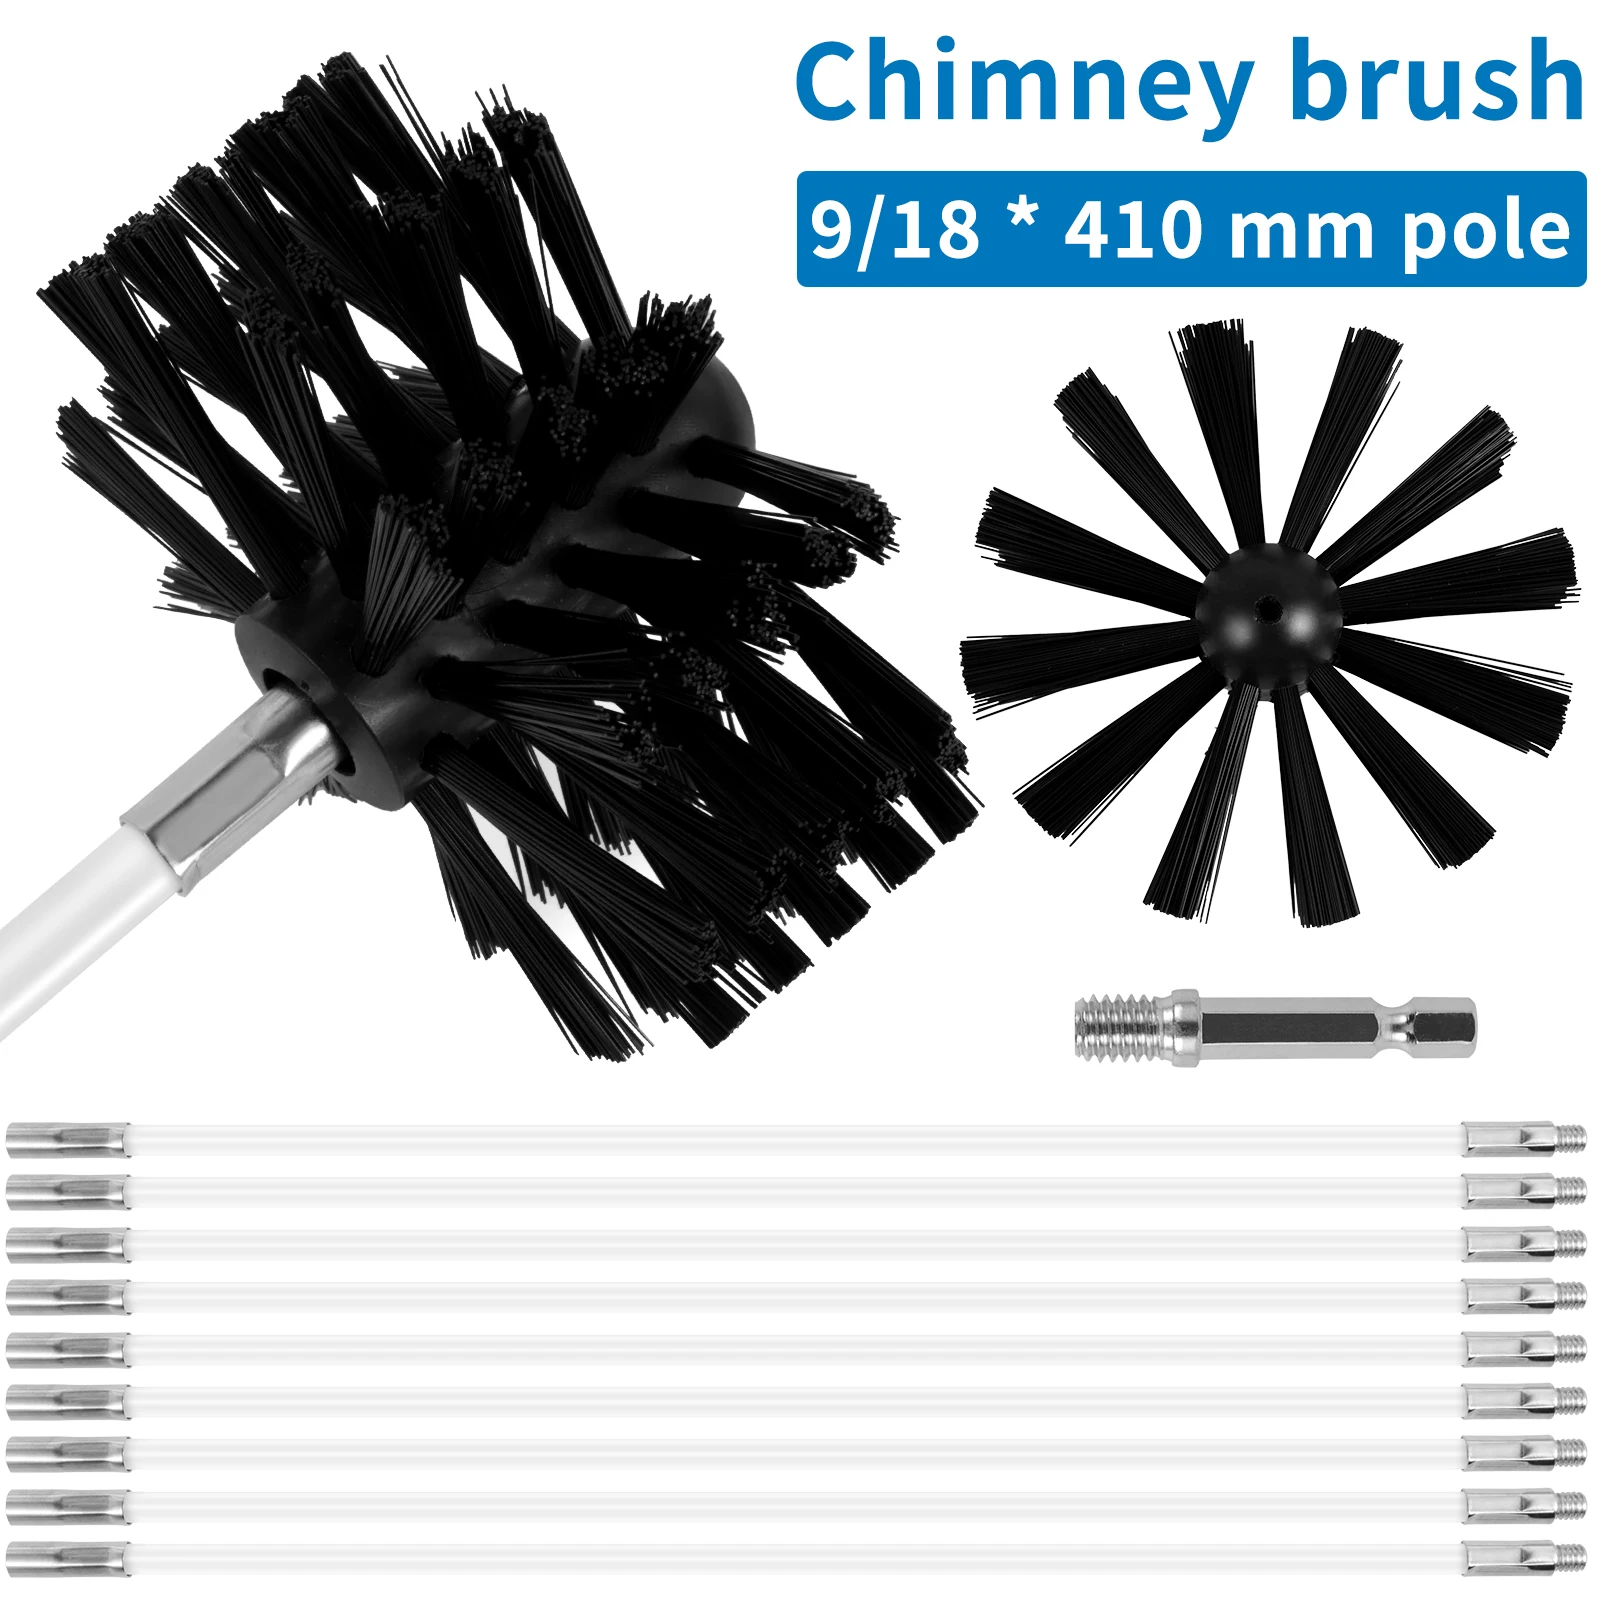 

Chimney Cleaning Brush Extendable Flexible Dryer Vent Cleaner Soft Bristle Effective Air Duct Cleaning Tool with 9/18 Rods Hex